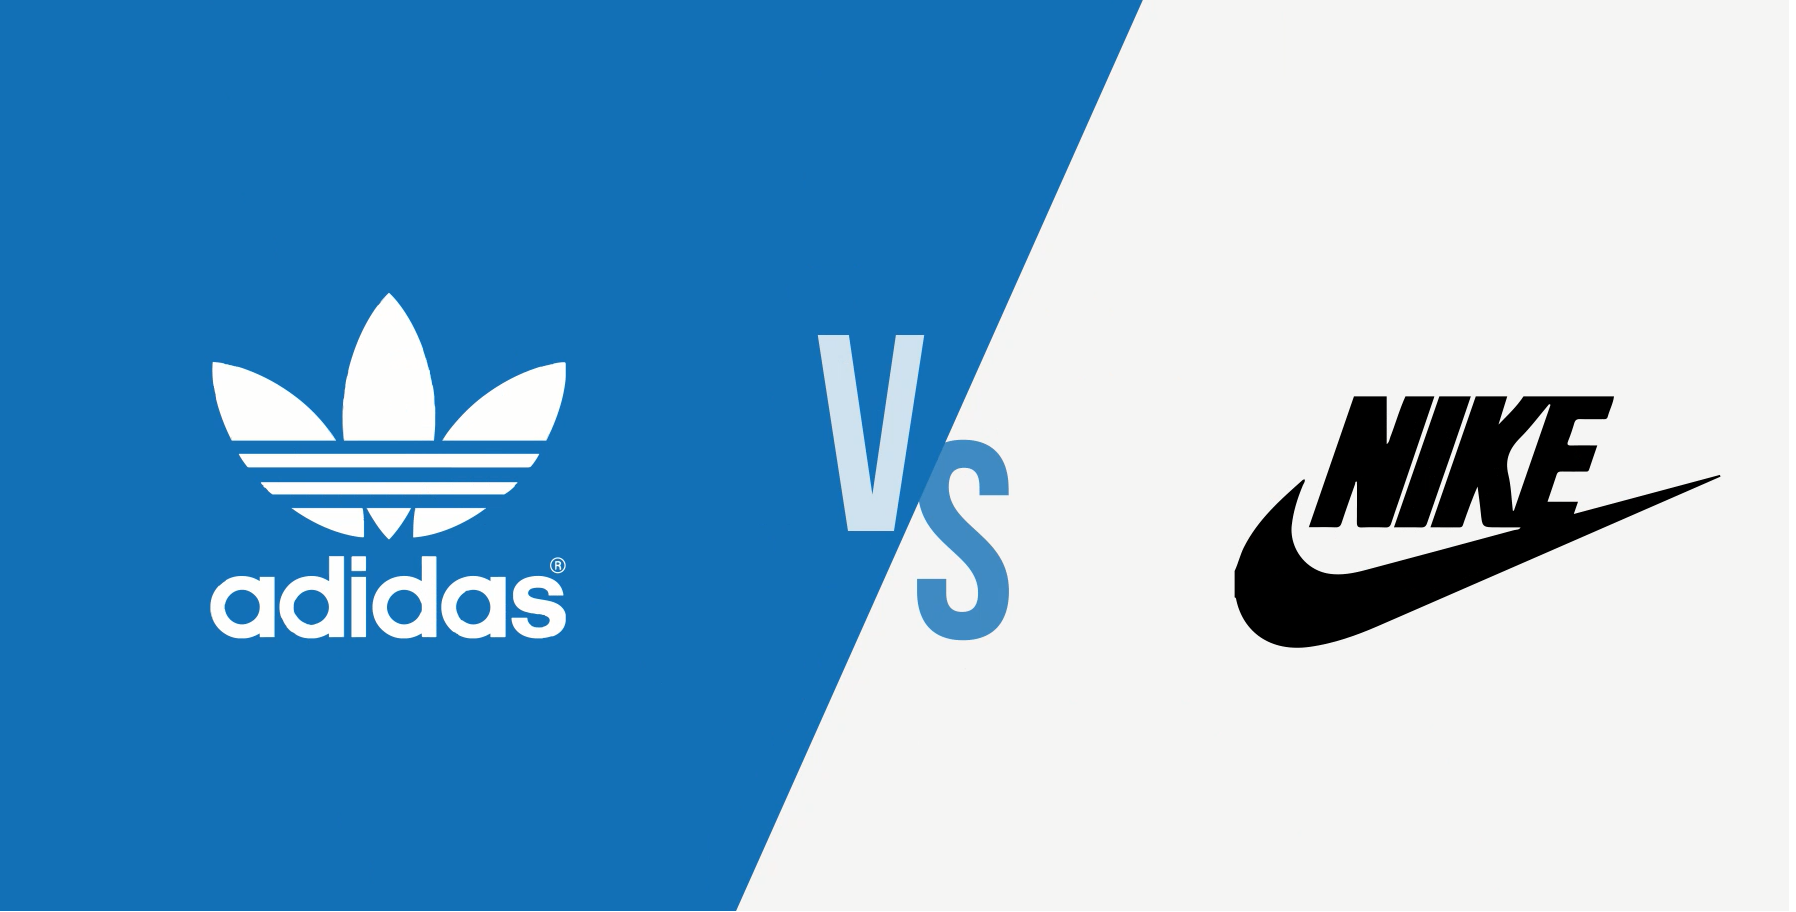 are adidas better than nike